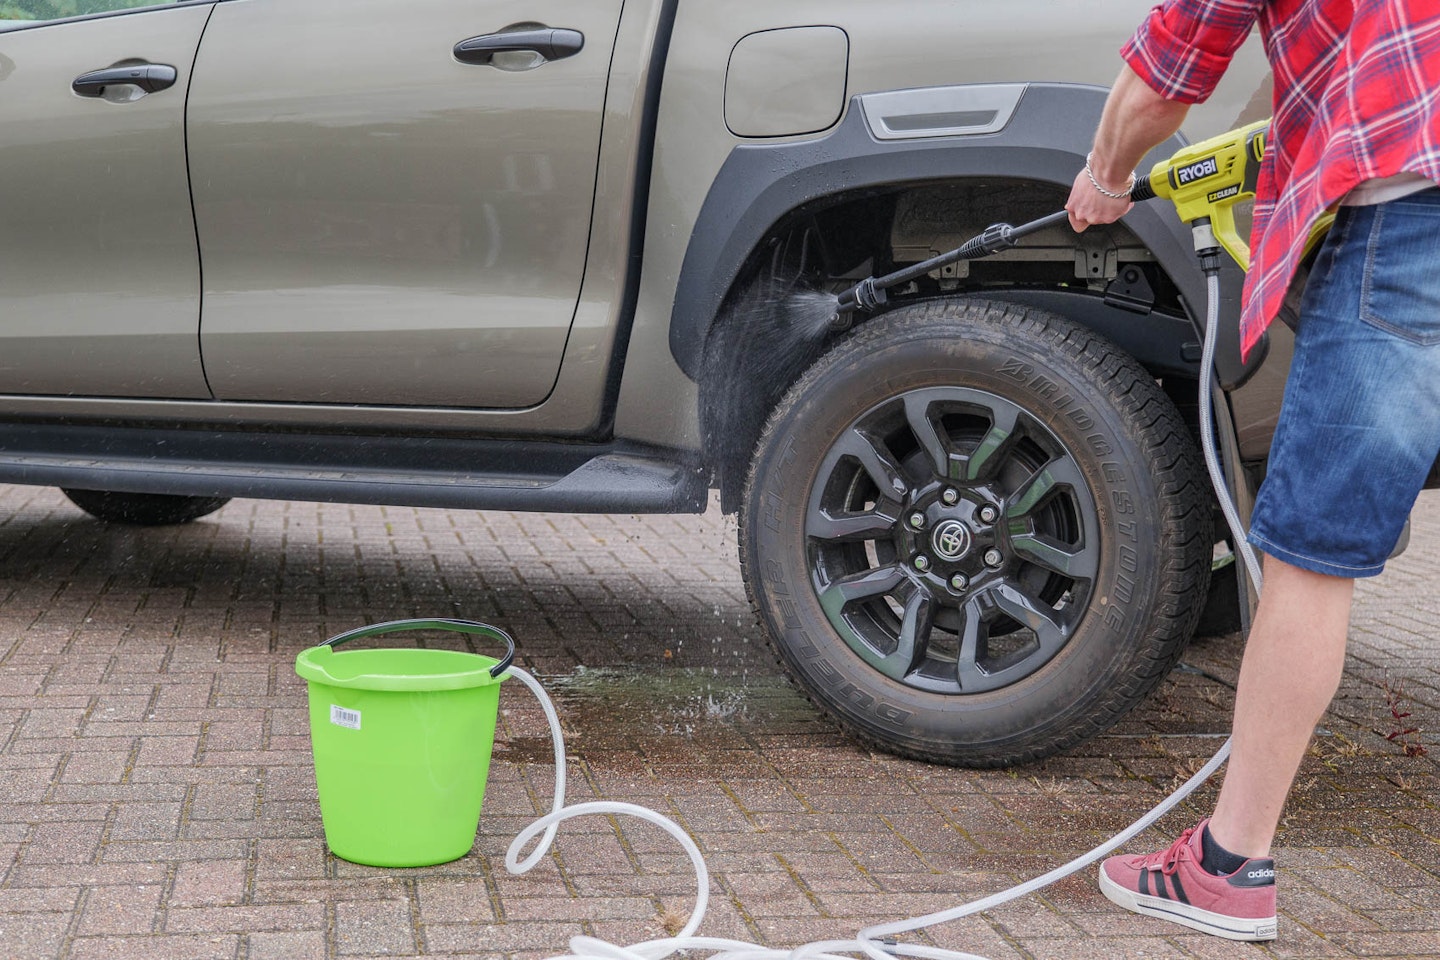 The Ryobi power washer in action cleaning a wheel